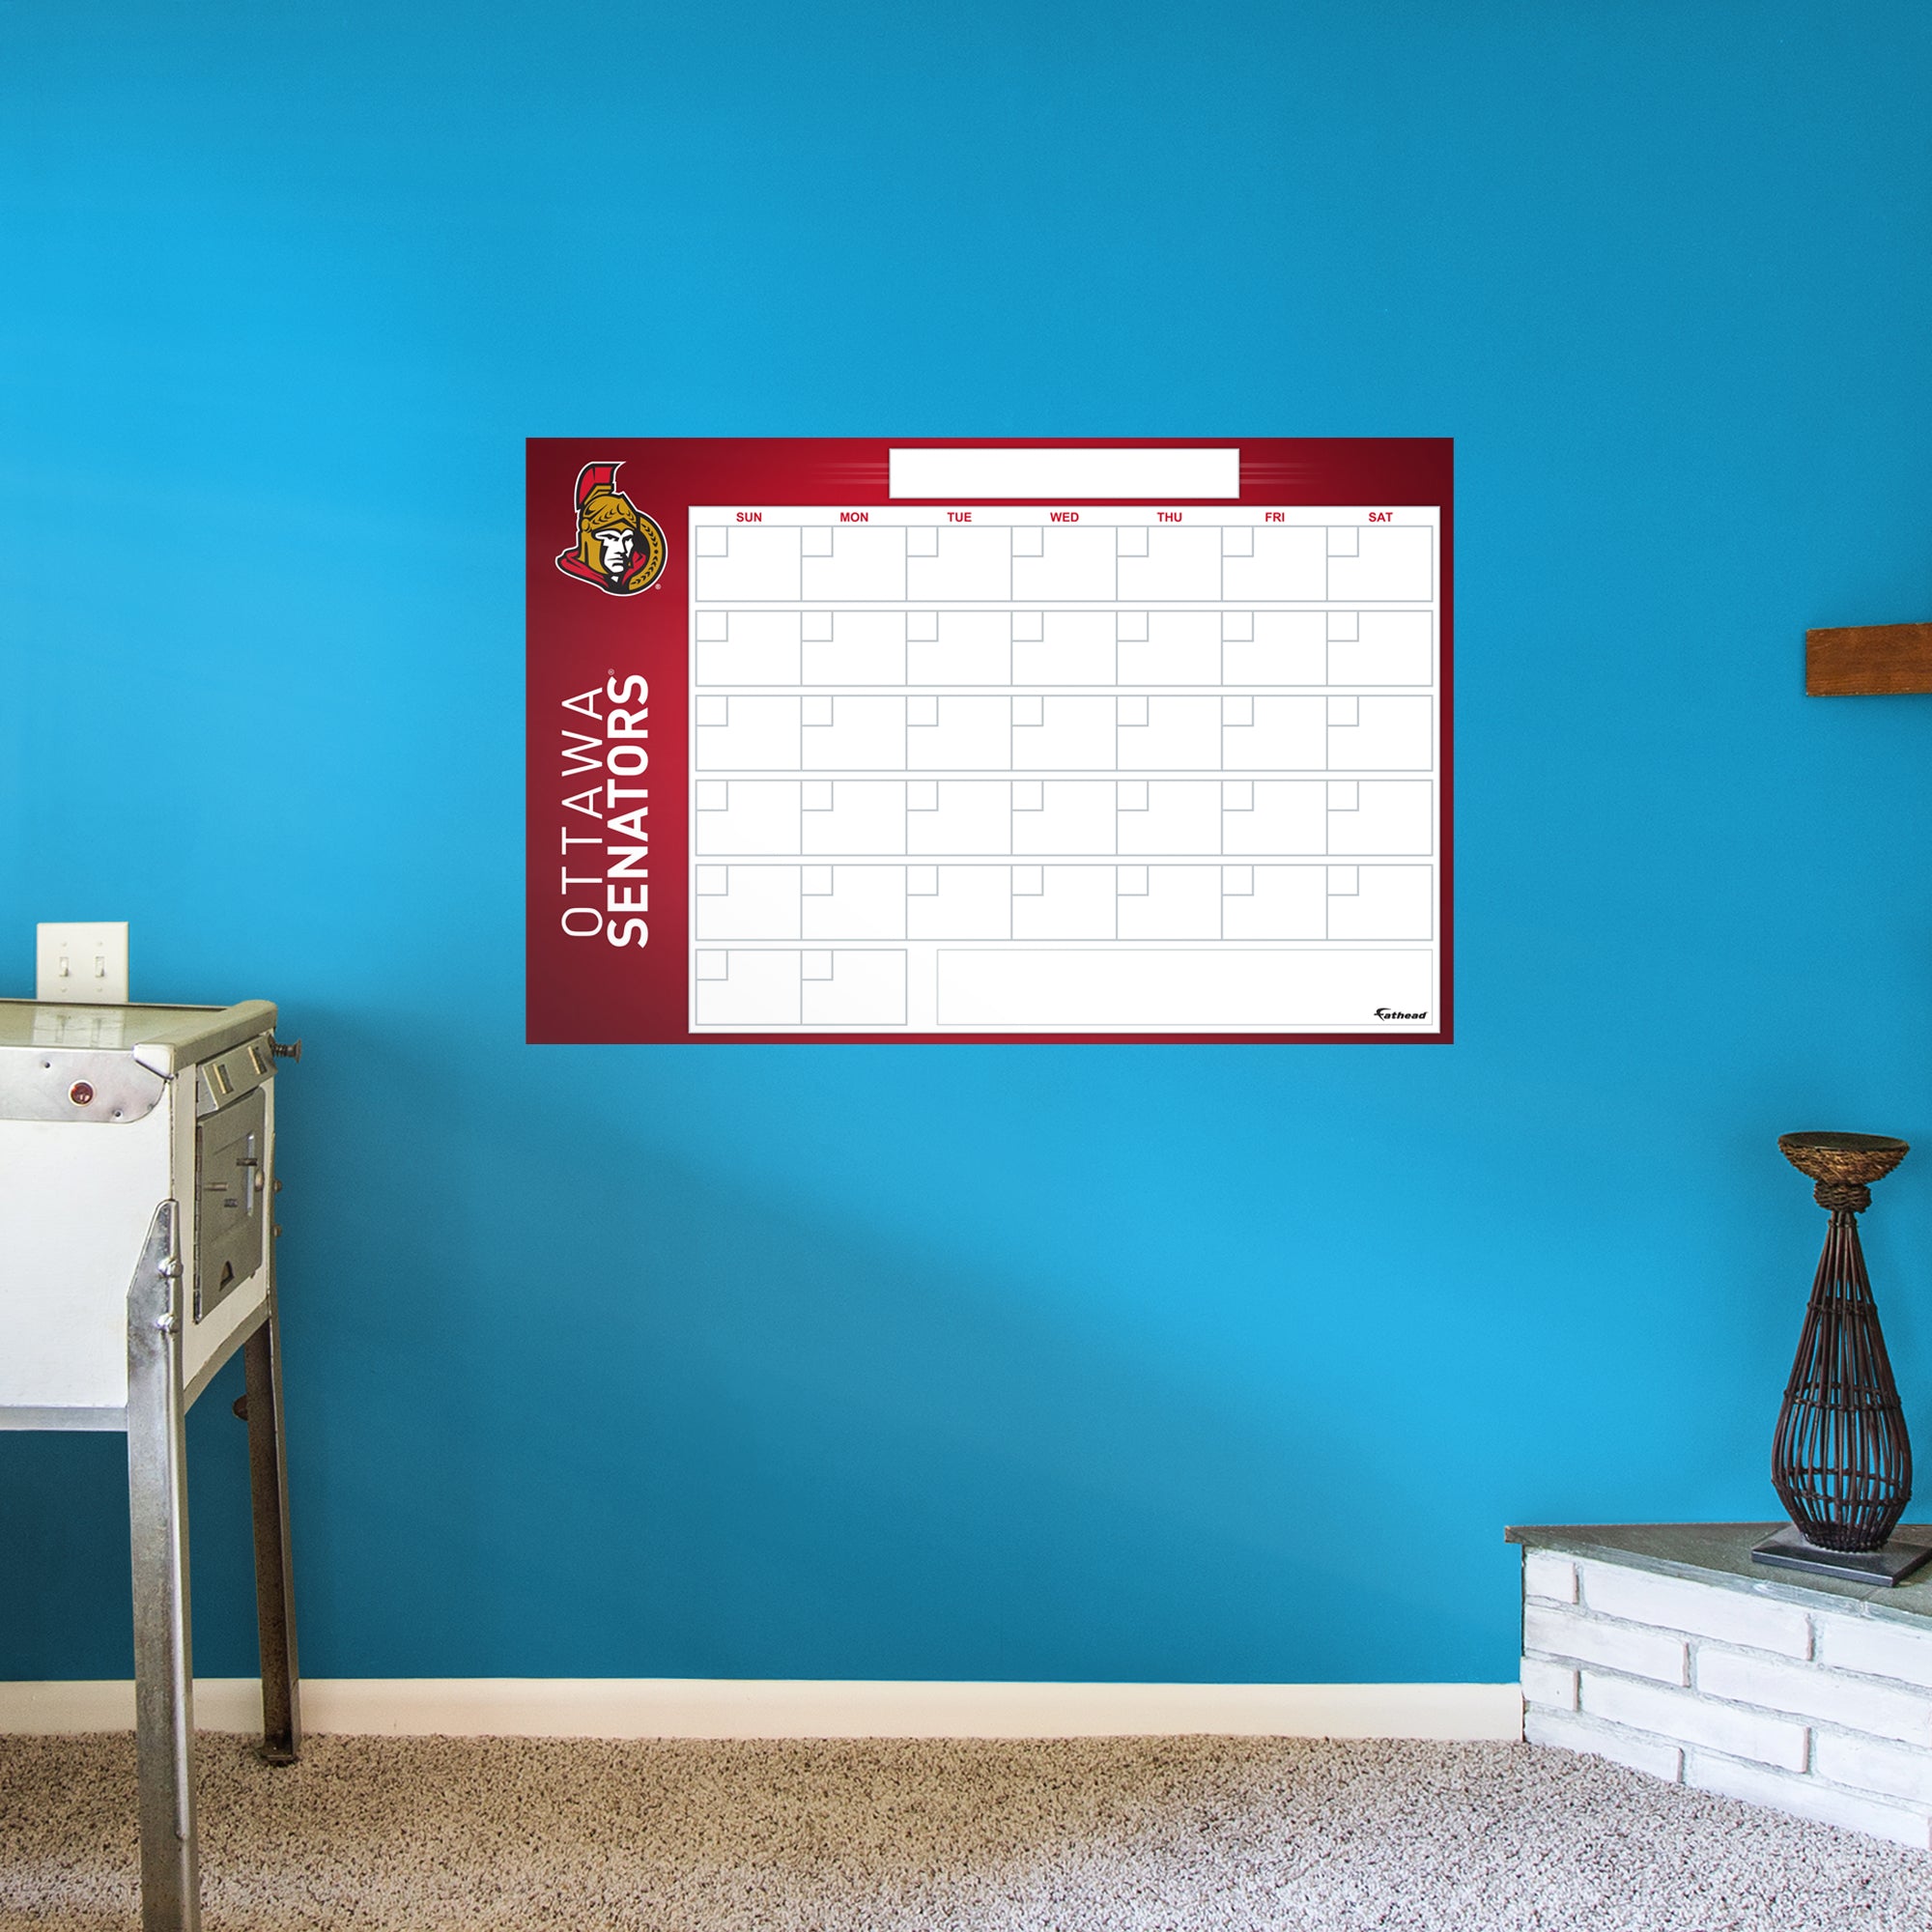 Ottawa Senators Dry Erase Calendar - Officially Licensed NHL Removable Wall Decal Giant Decal (57"W x 34"H) by Fathead | Vinyl